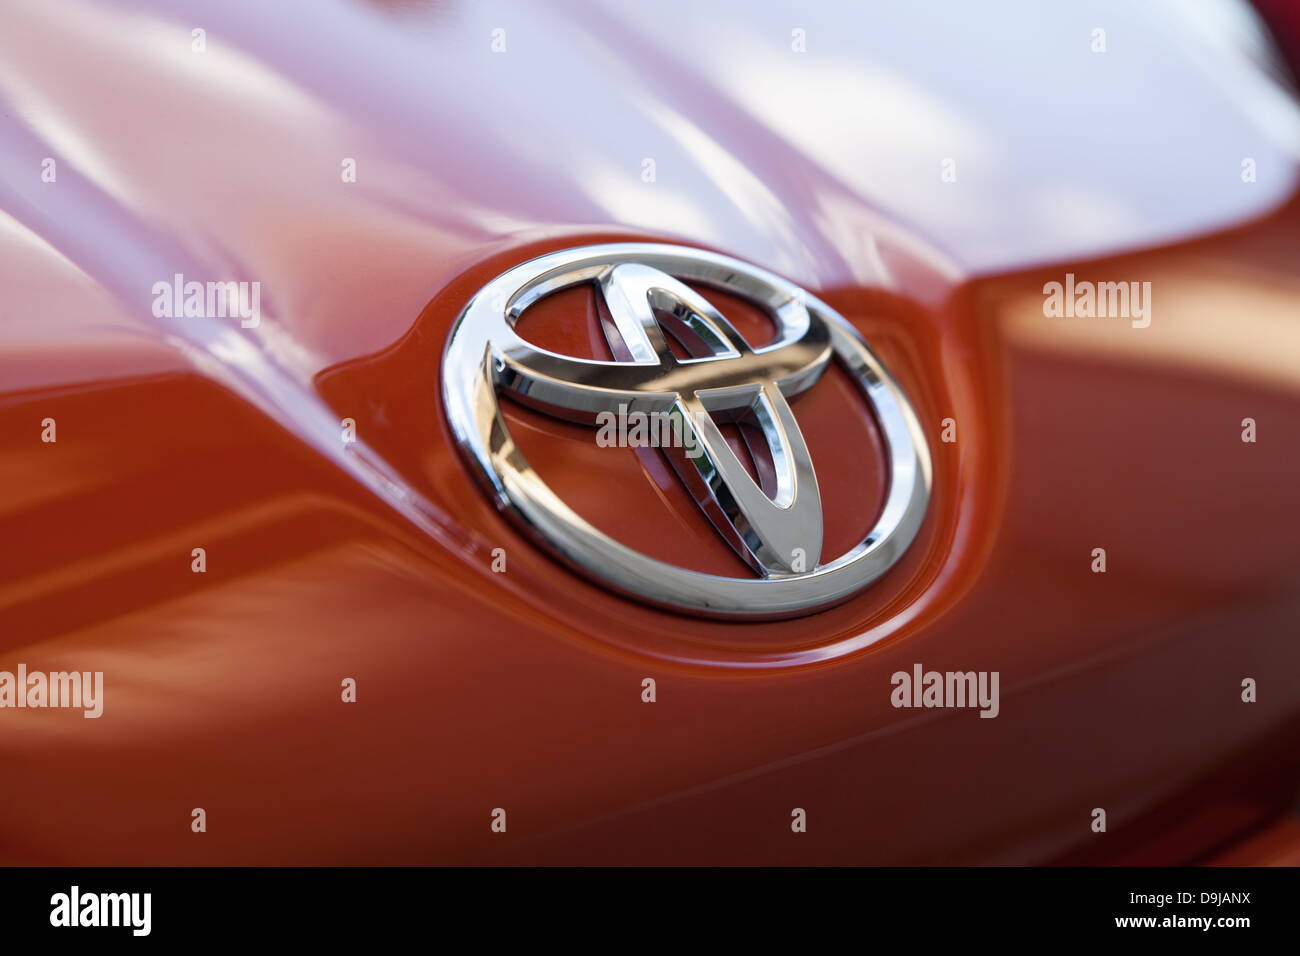 Tallinn, Estonia - June 3, 2013: Toyota logo. Toyota Corporation (Japan) is one of the largest car producers in the world. Stock Photo